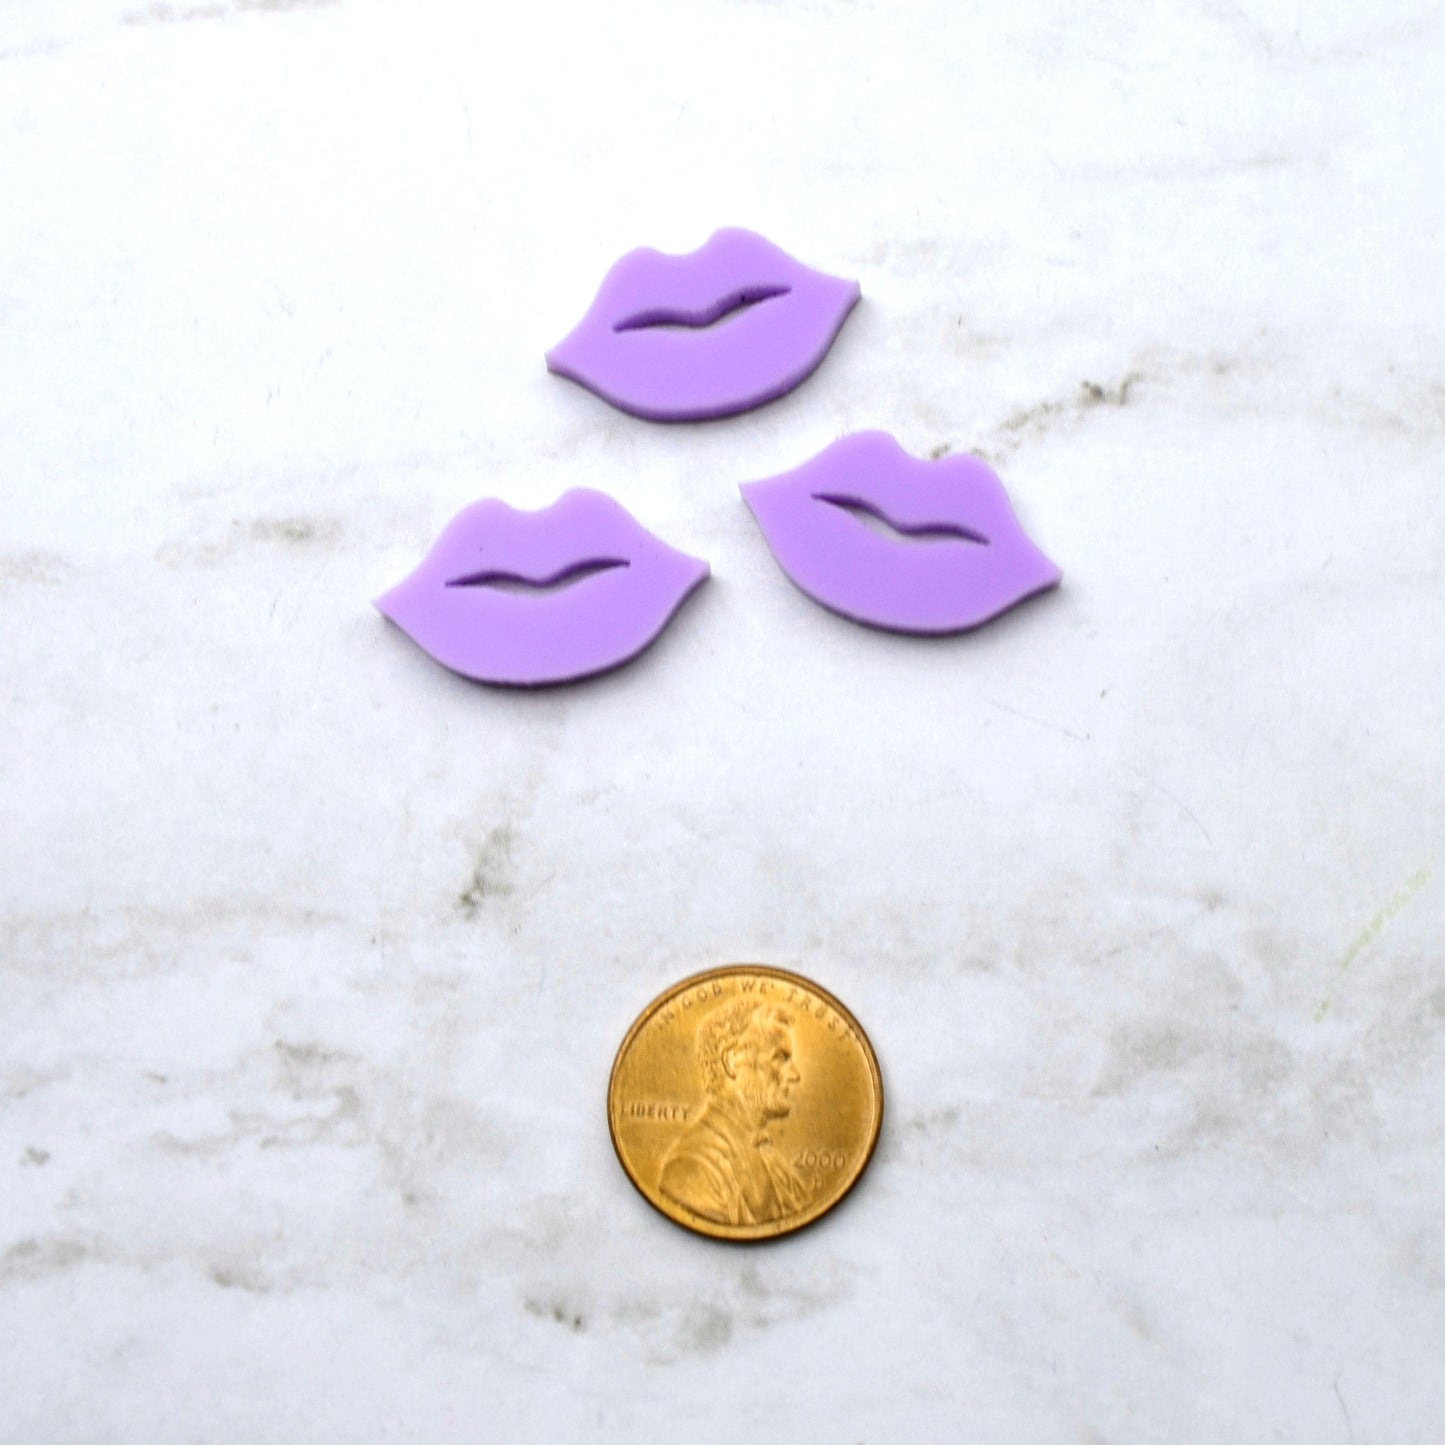 LAVENDER LIPS 3 Cabochons Flatback Cabs In Laser Cut Acrylic